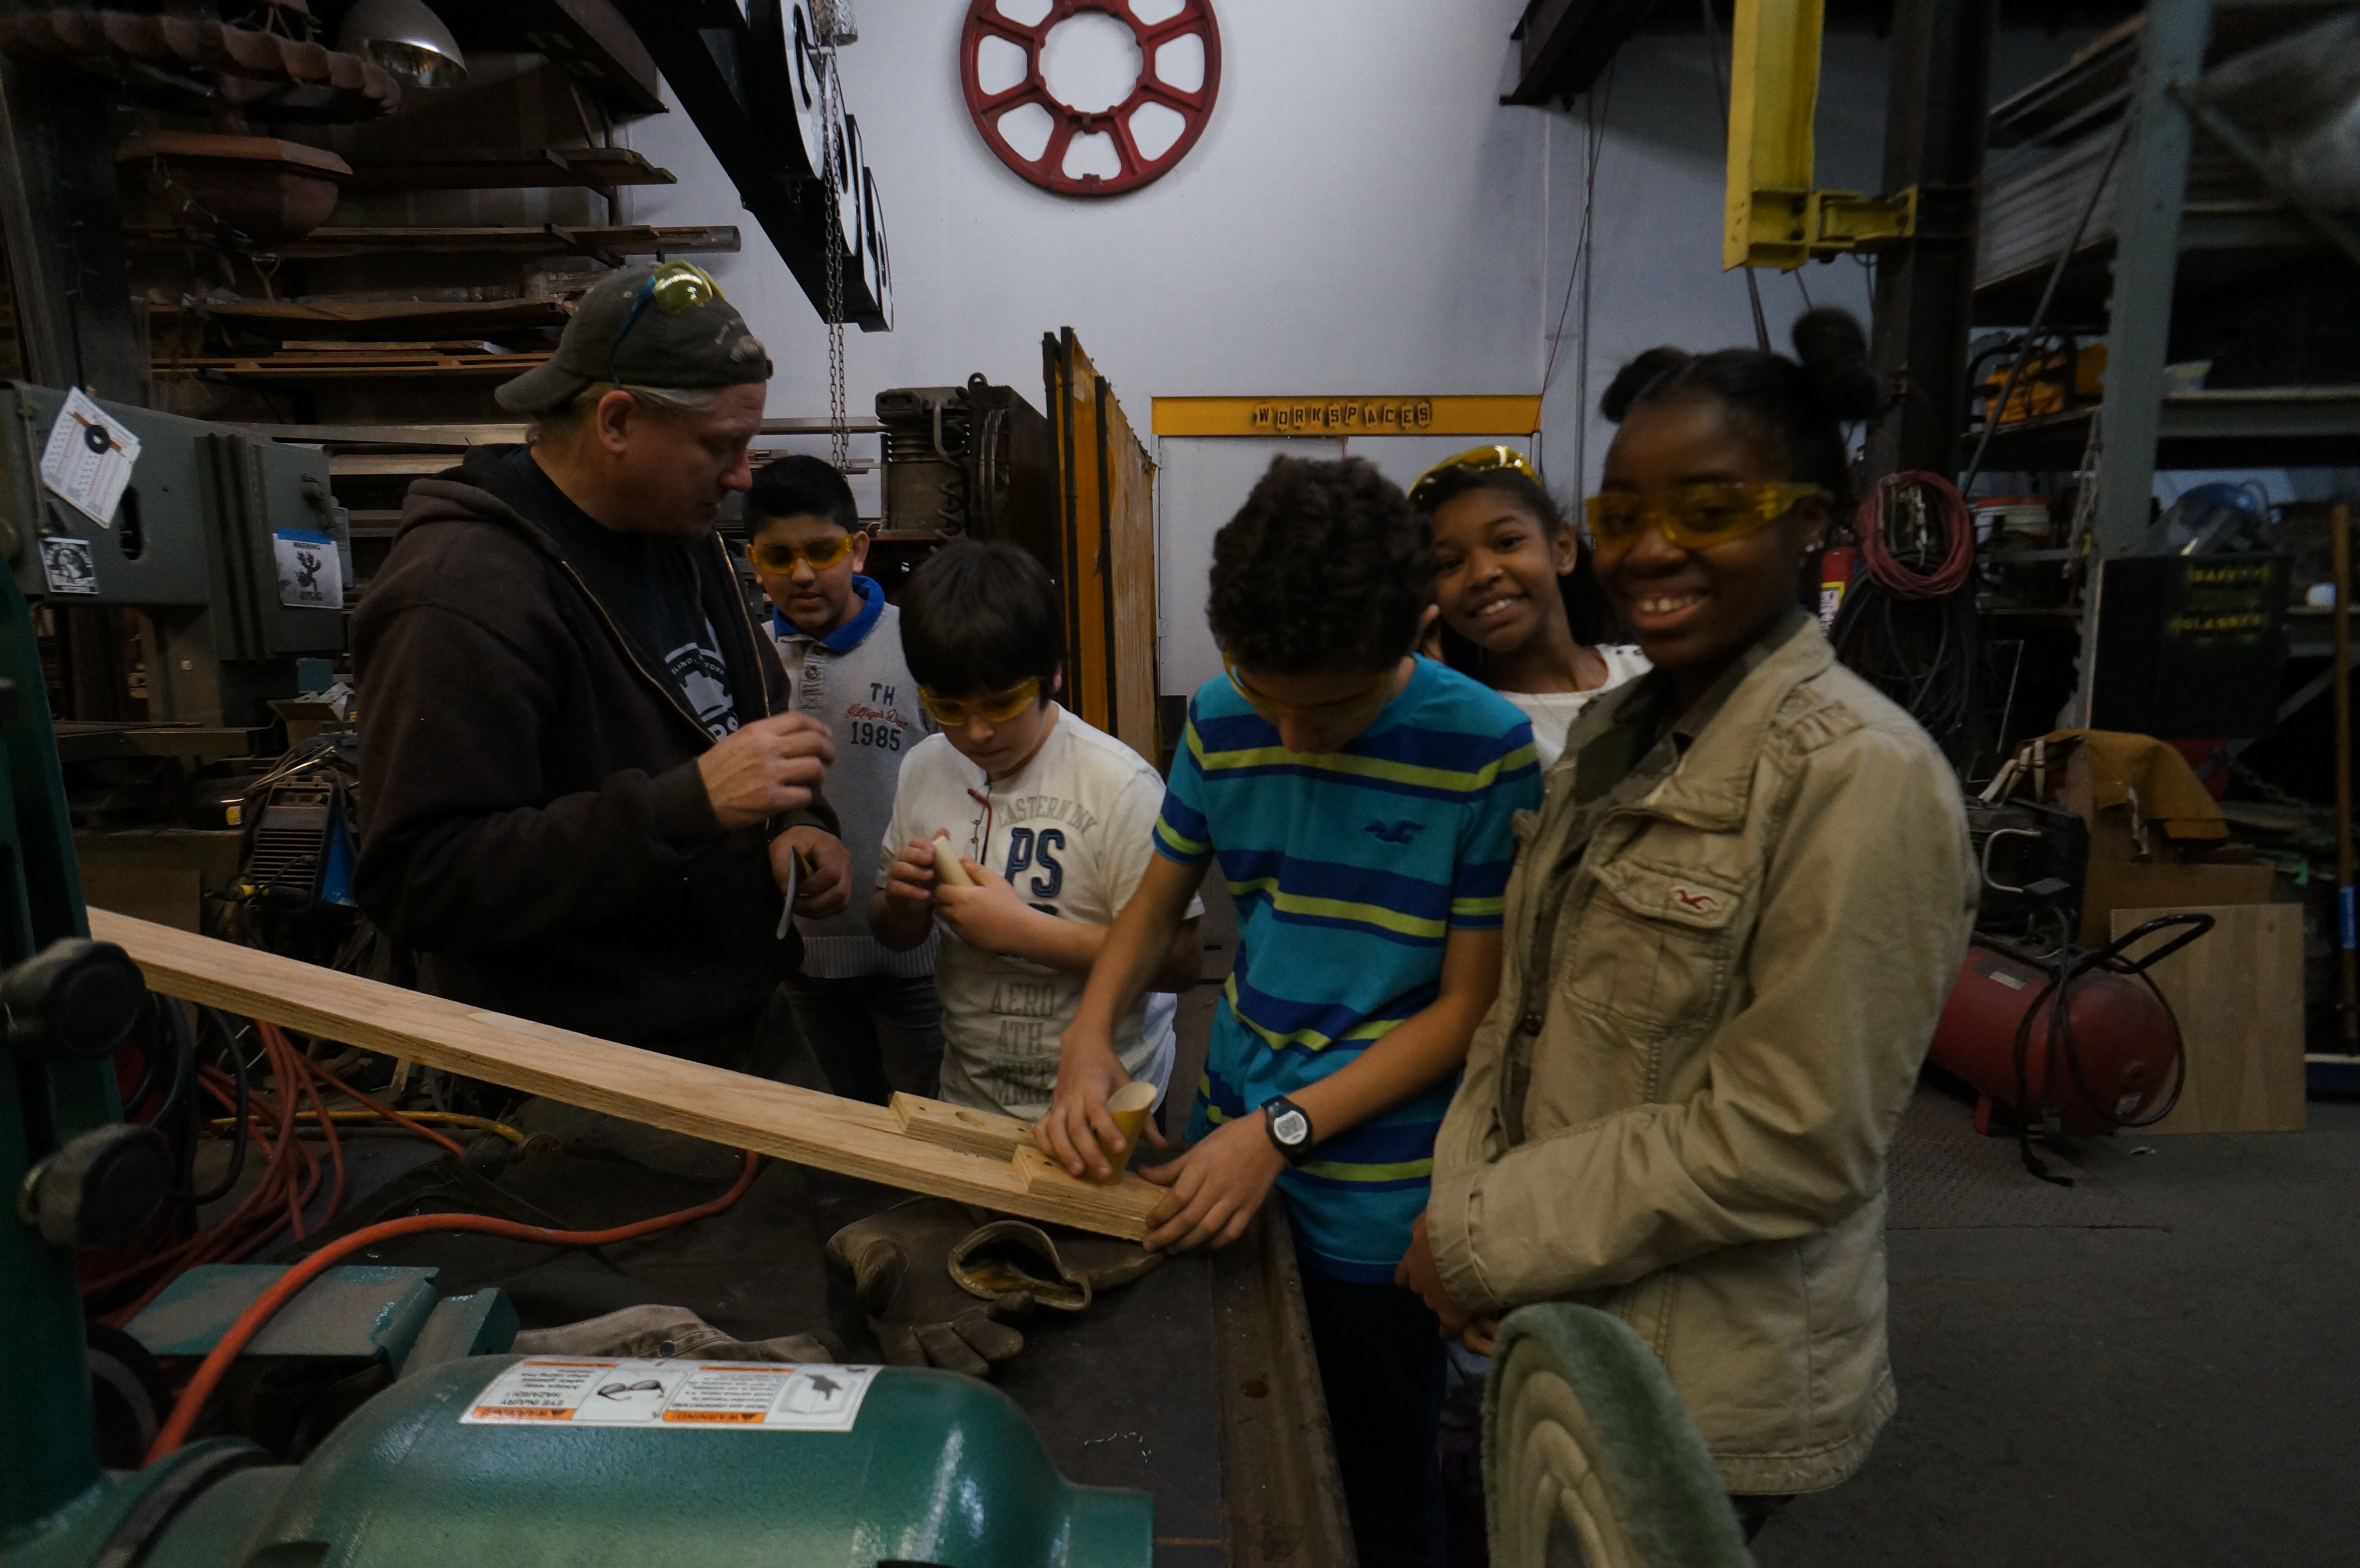 Tours of Makerspace NYC in Brooklyn and Staten Island